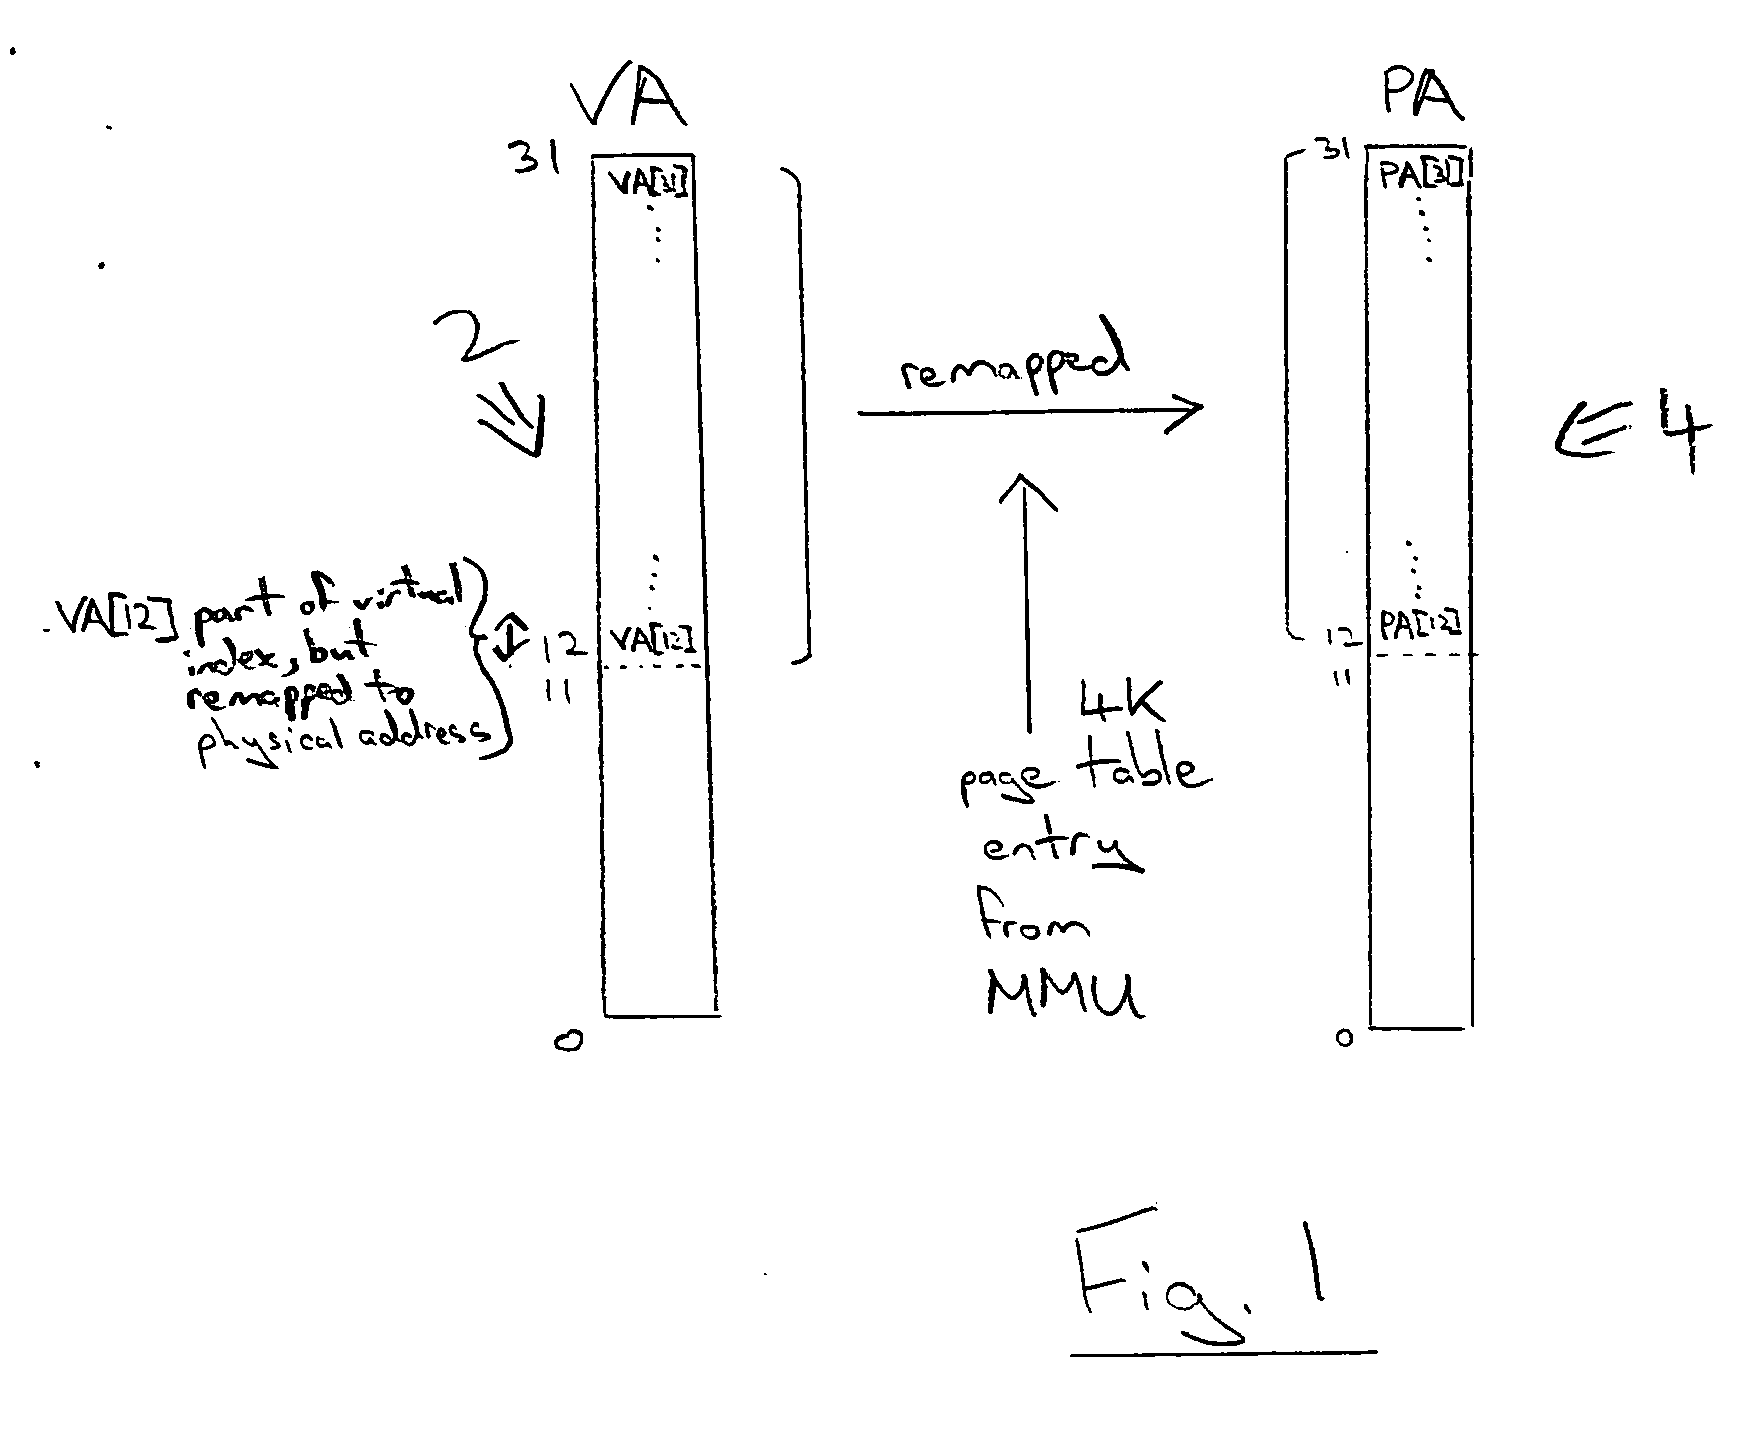 Alias management within a virtually indexed and physically tagged cache memory